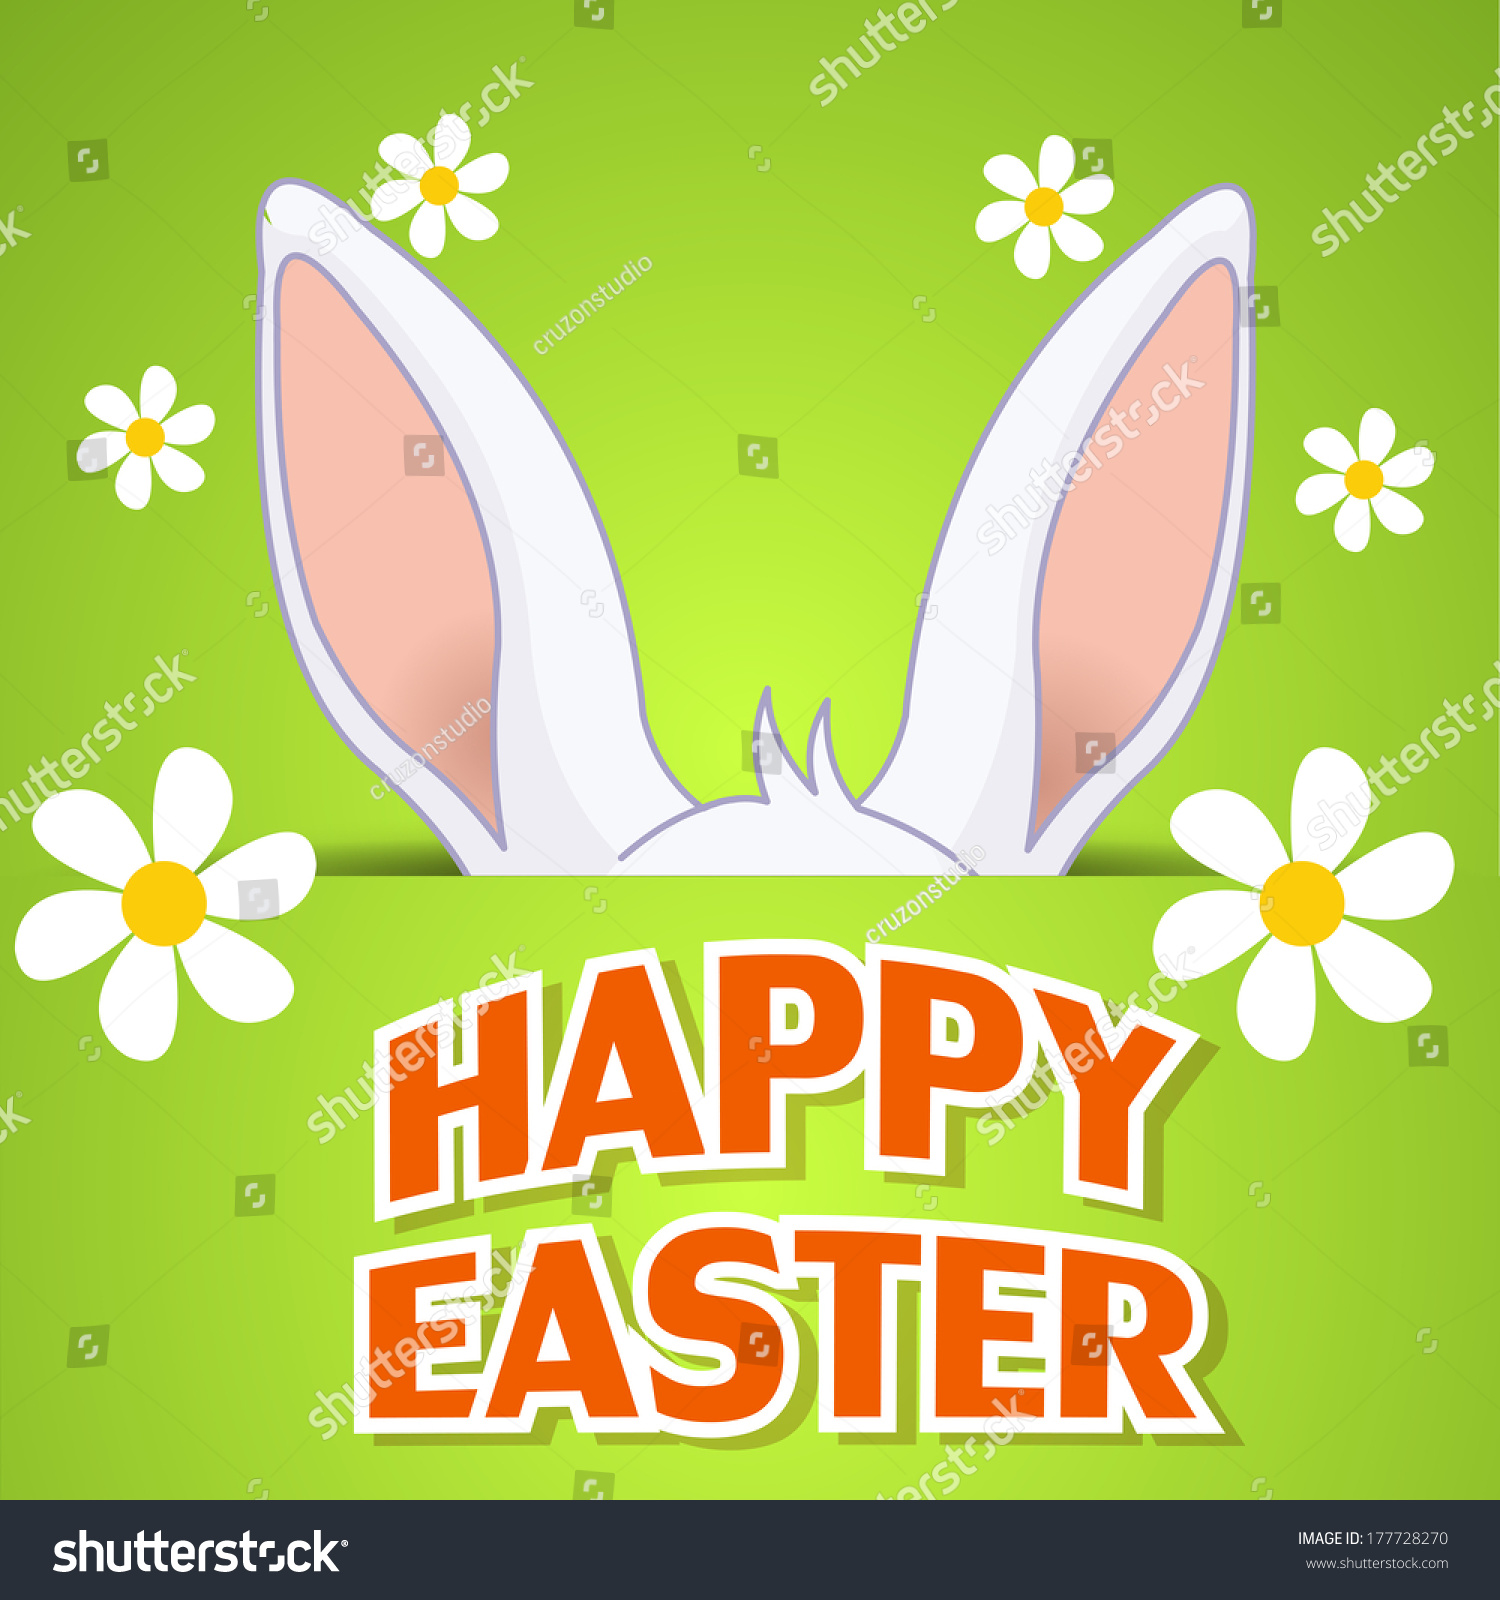 Easter bunny on green background. #177728270